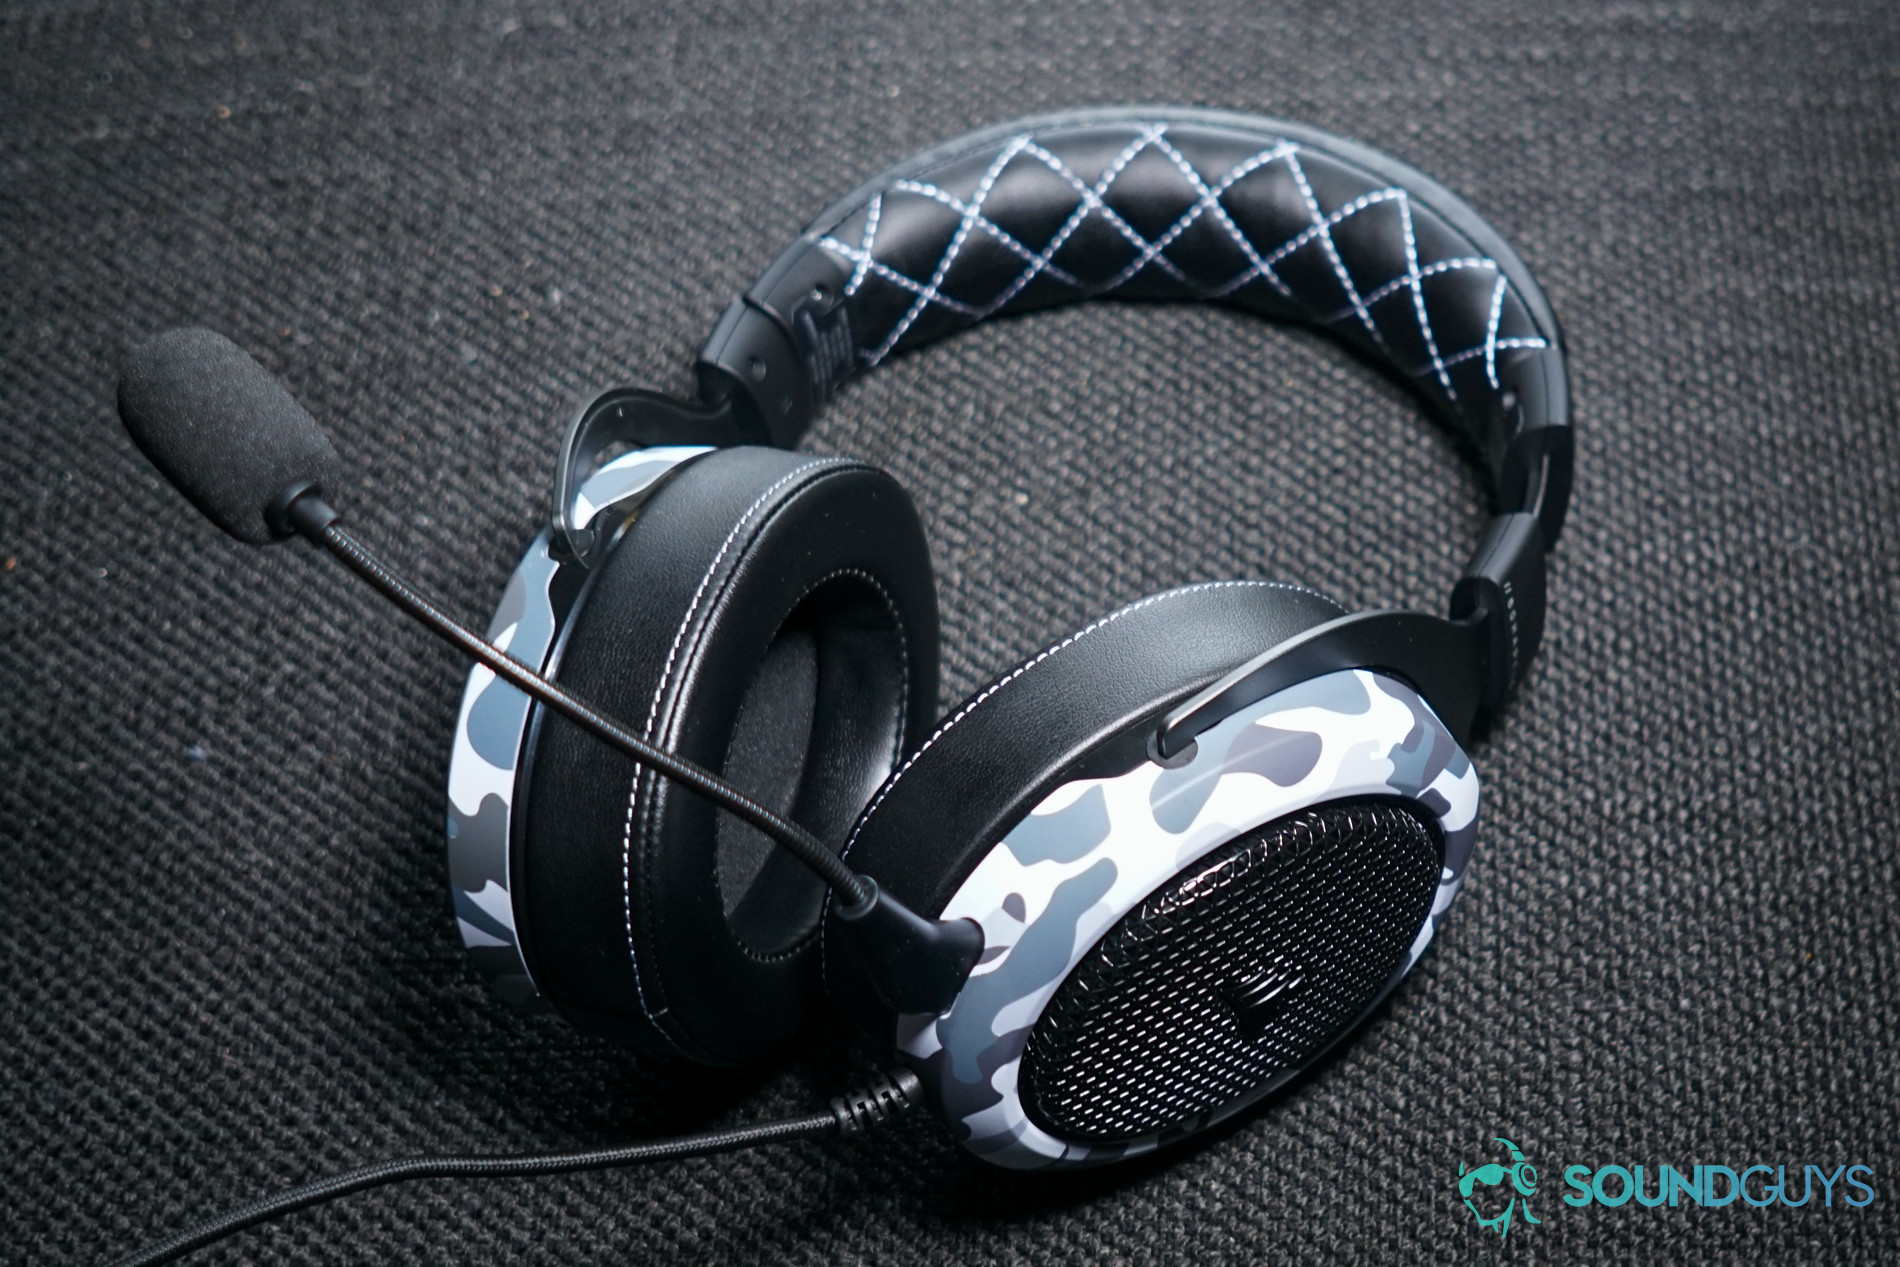 The Corsair HS60 Haptic gaming headset lays on a fabric surface